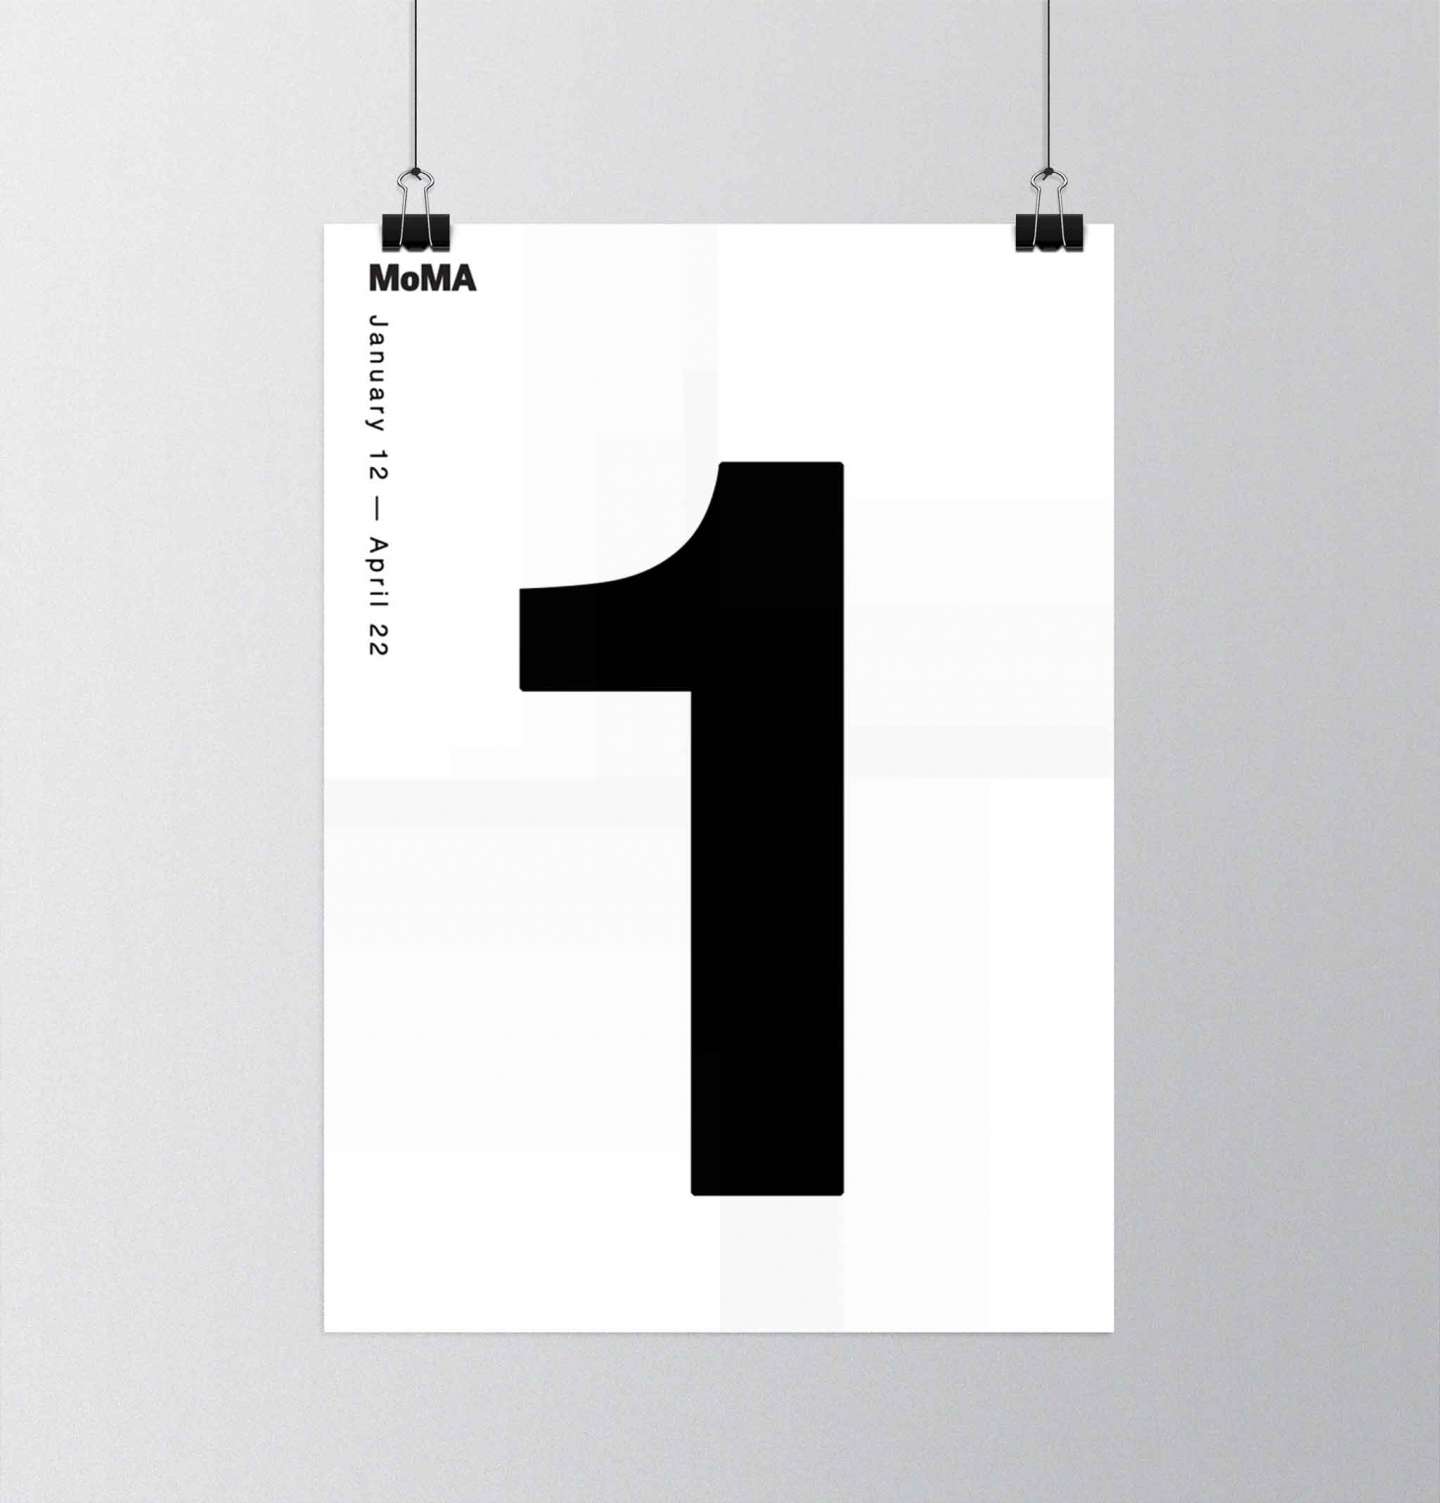 Binary Code Posters for MoMA